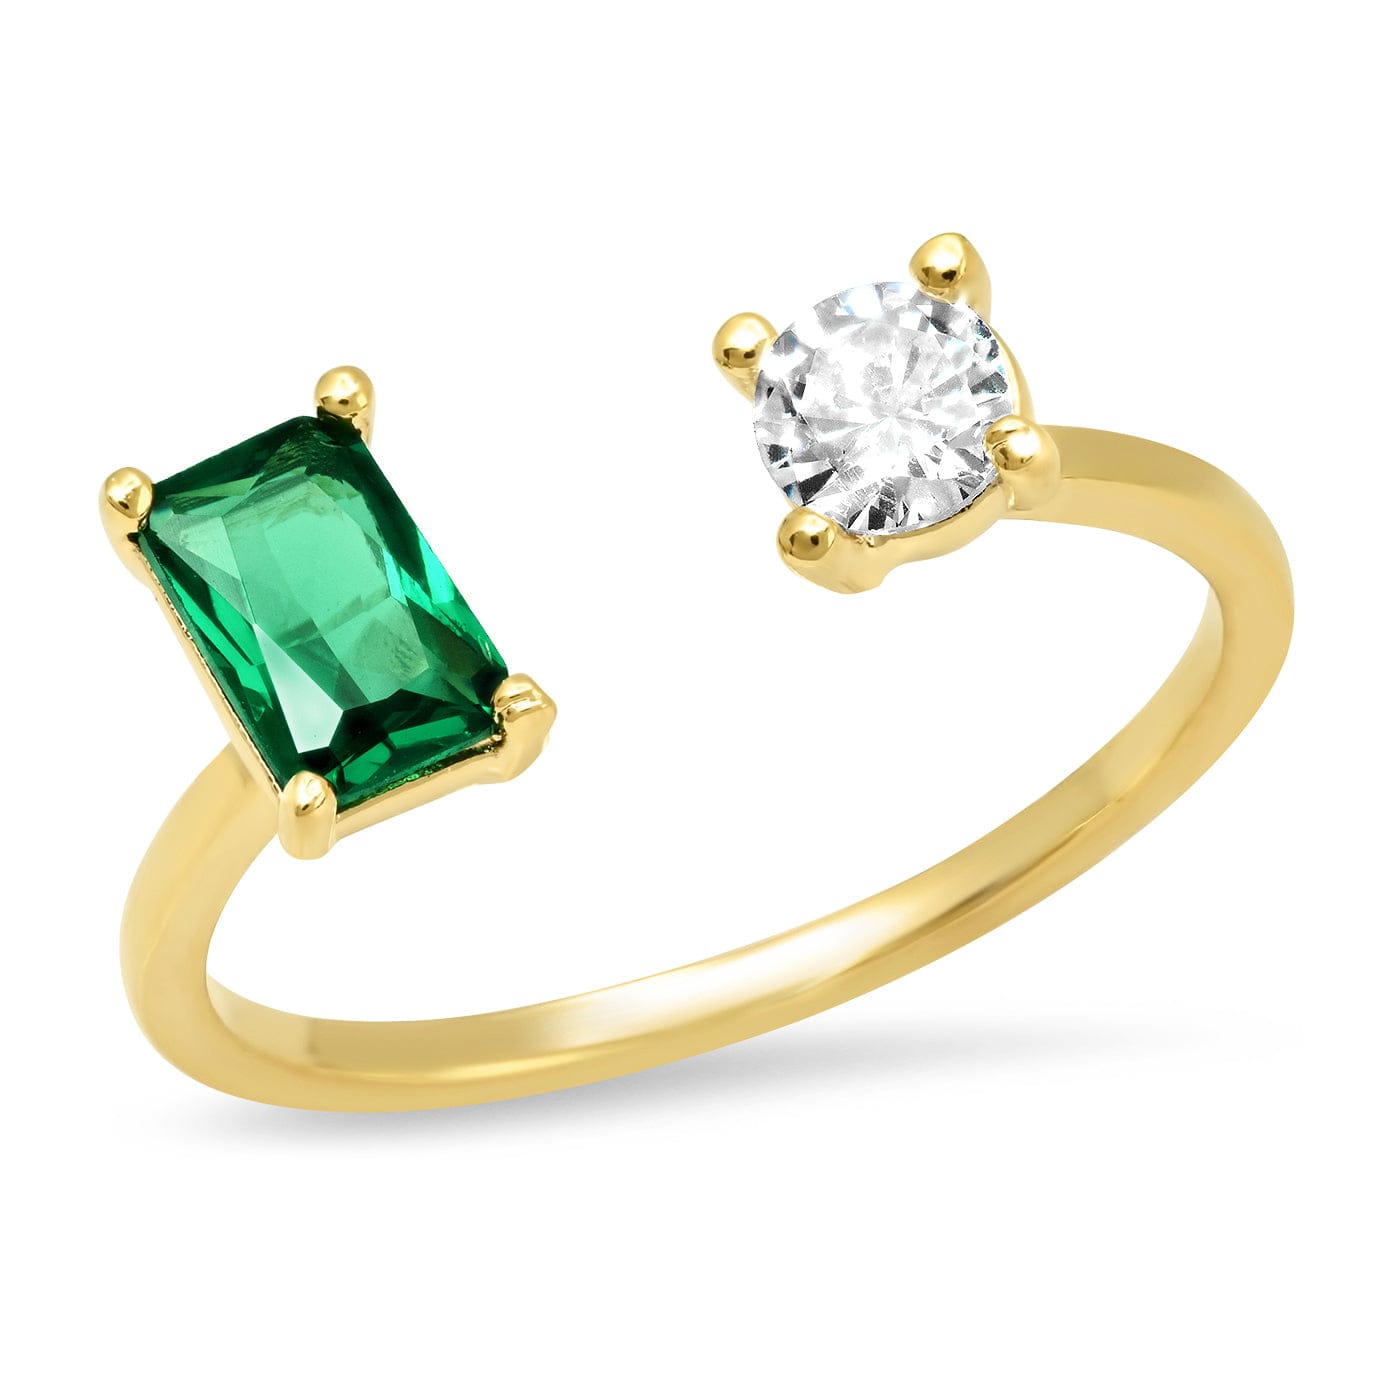 TAI JEWELRY Rings Open Ring With Emerald And Cz Stone